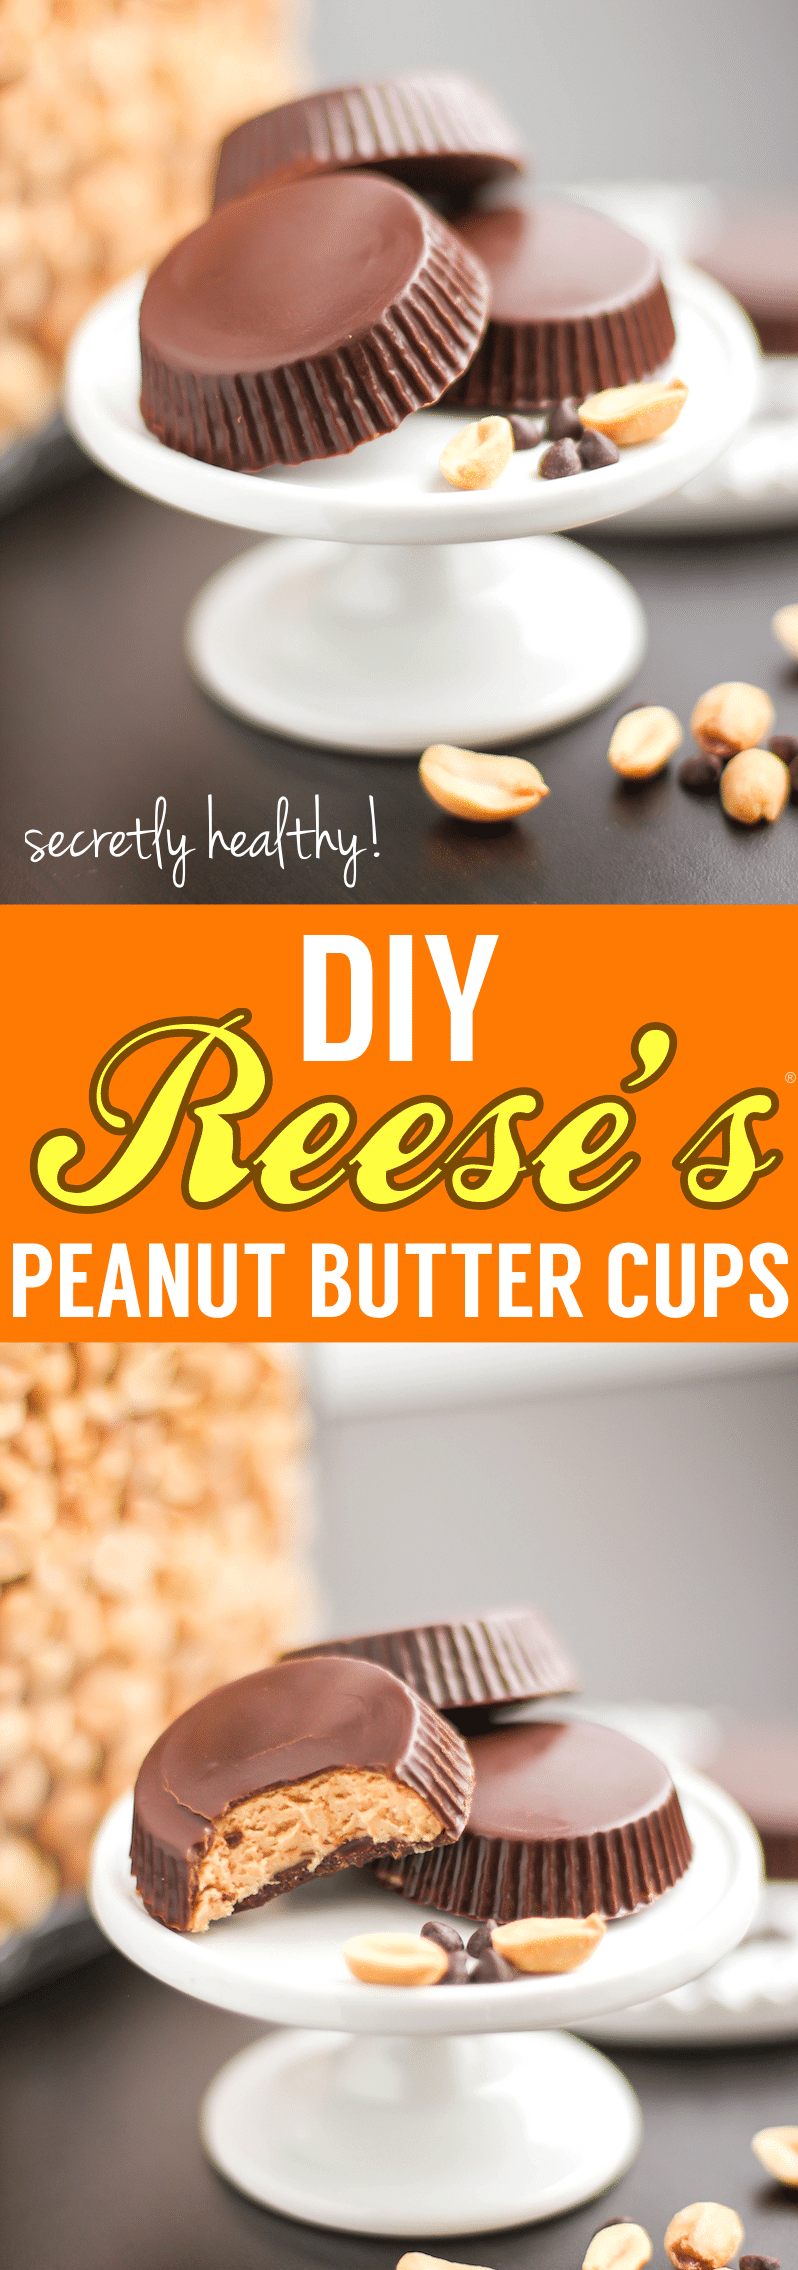 Healthy Homemade Peanut Butter Cups recipe - Healthy Dessert Recipes at the Desserts With Benefits Blog (www.DessertsWithBenefits.com)